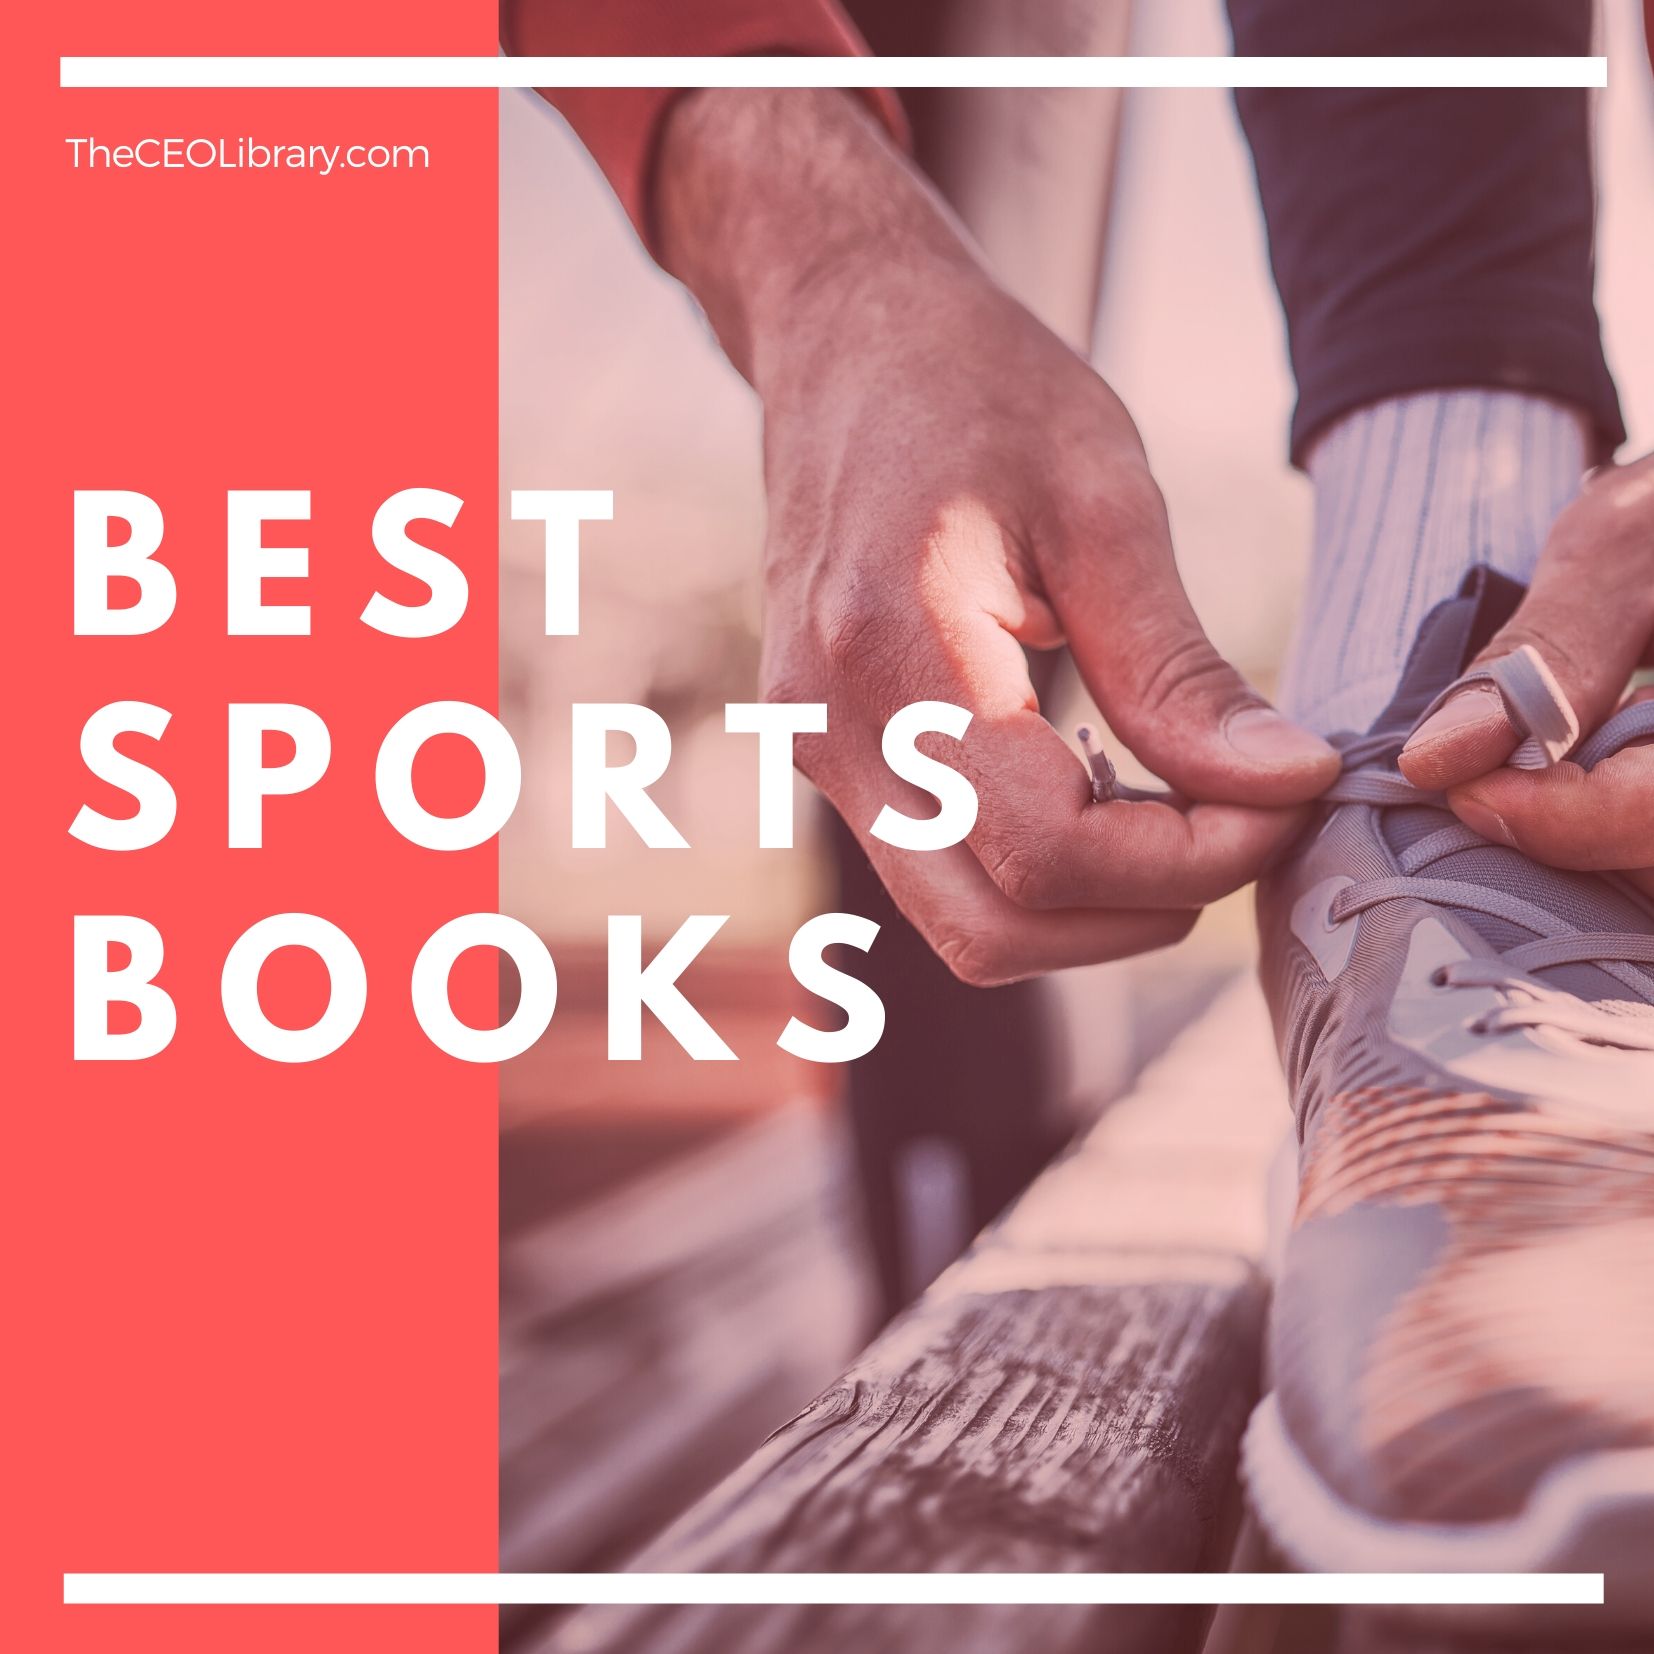 Best Sports Books Books to Inspire and Help in a Better Athlete